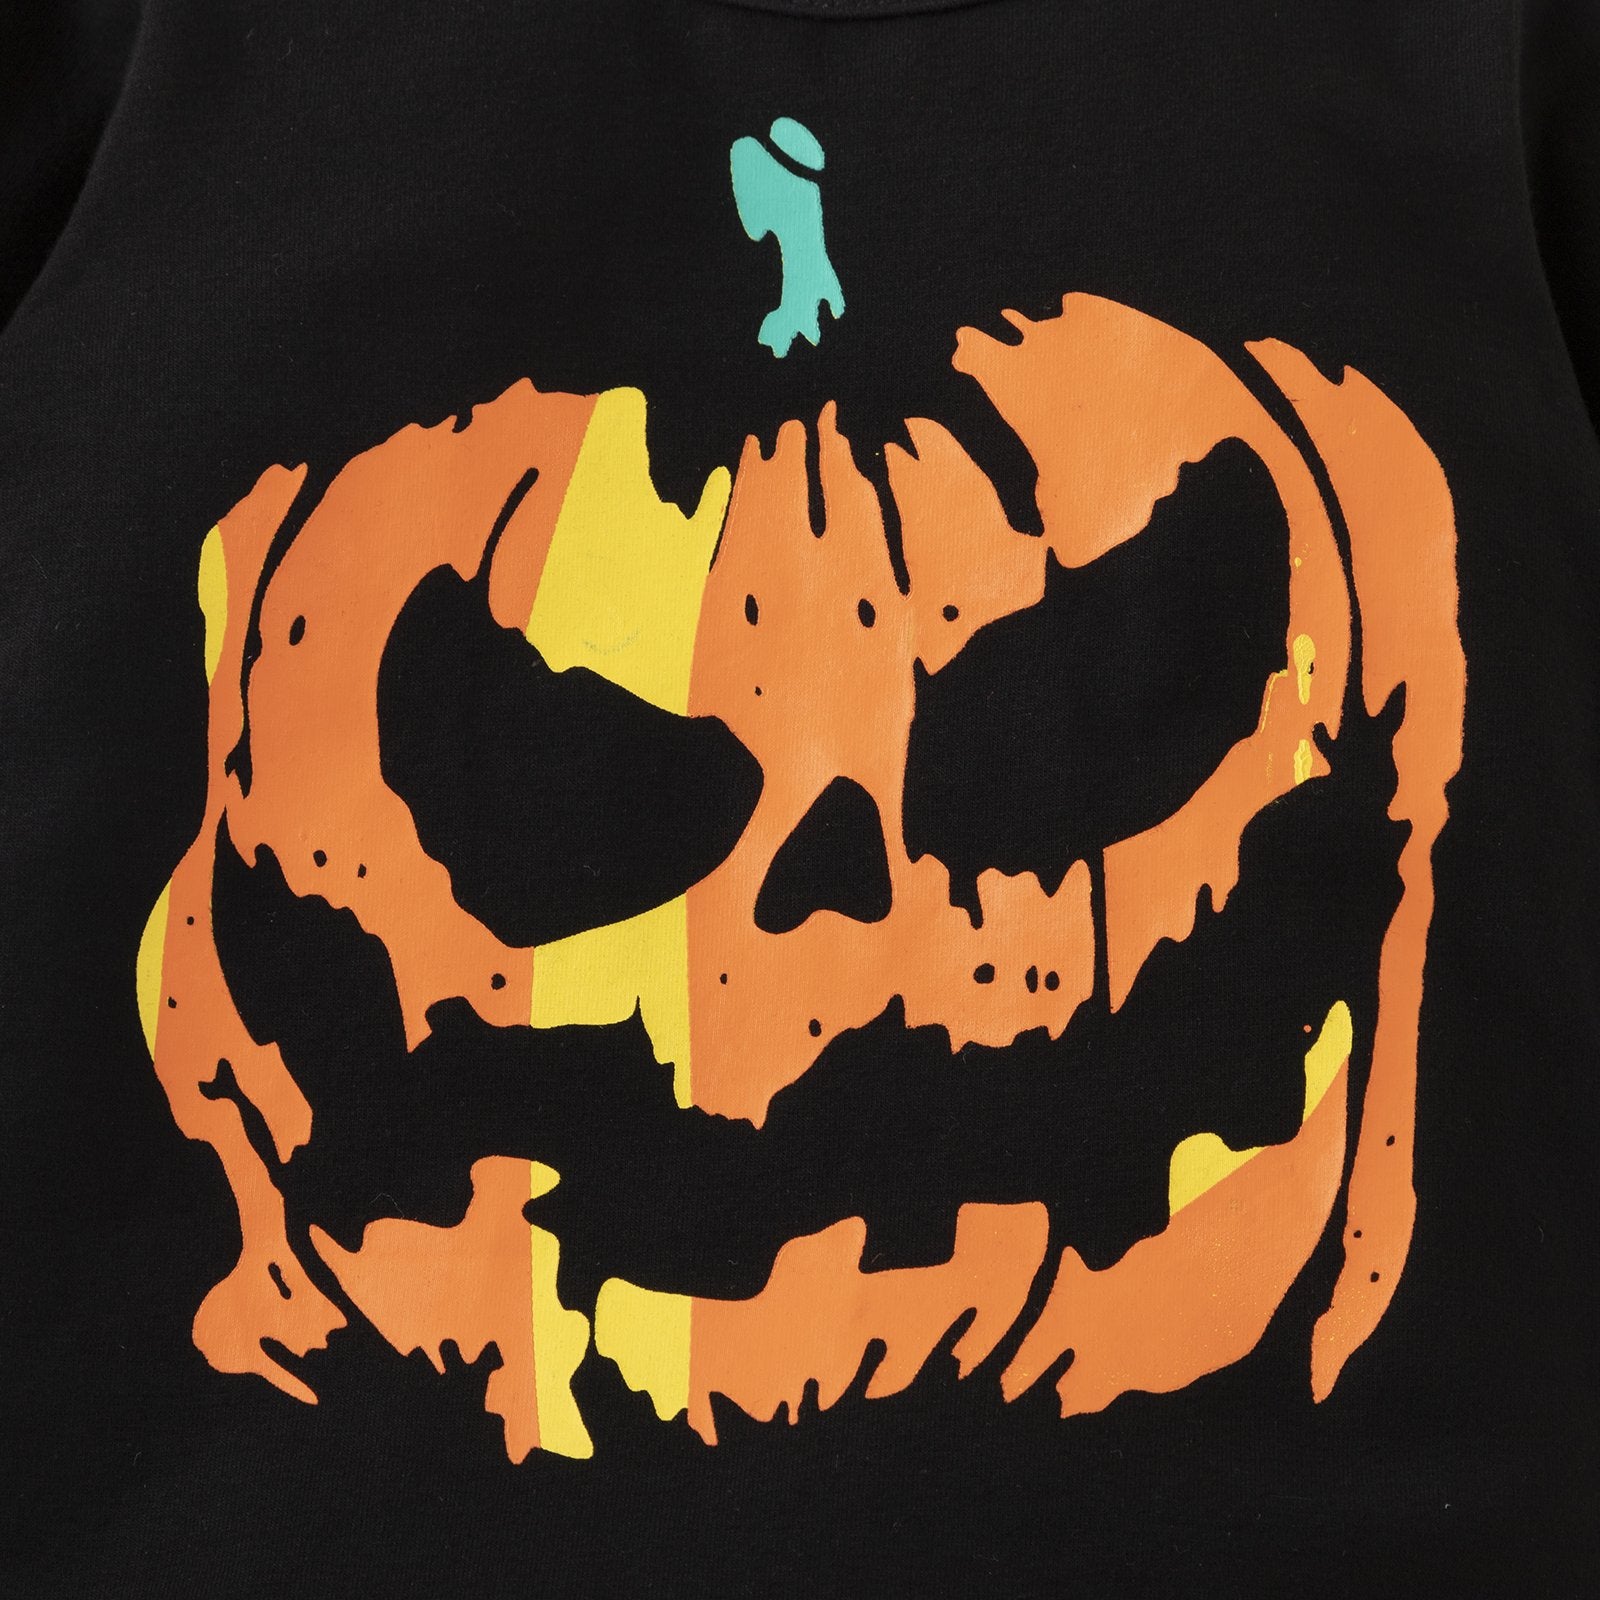 Baby Halloween Style Pumpkin Head Print Solid Color Long Sleeve Jumpsuit Boutique Baby Clothes Wholesale